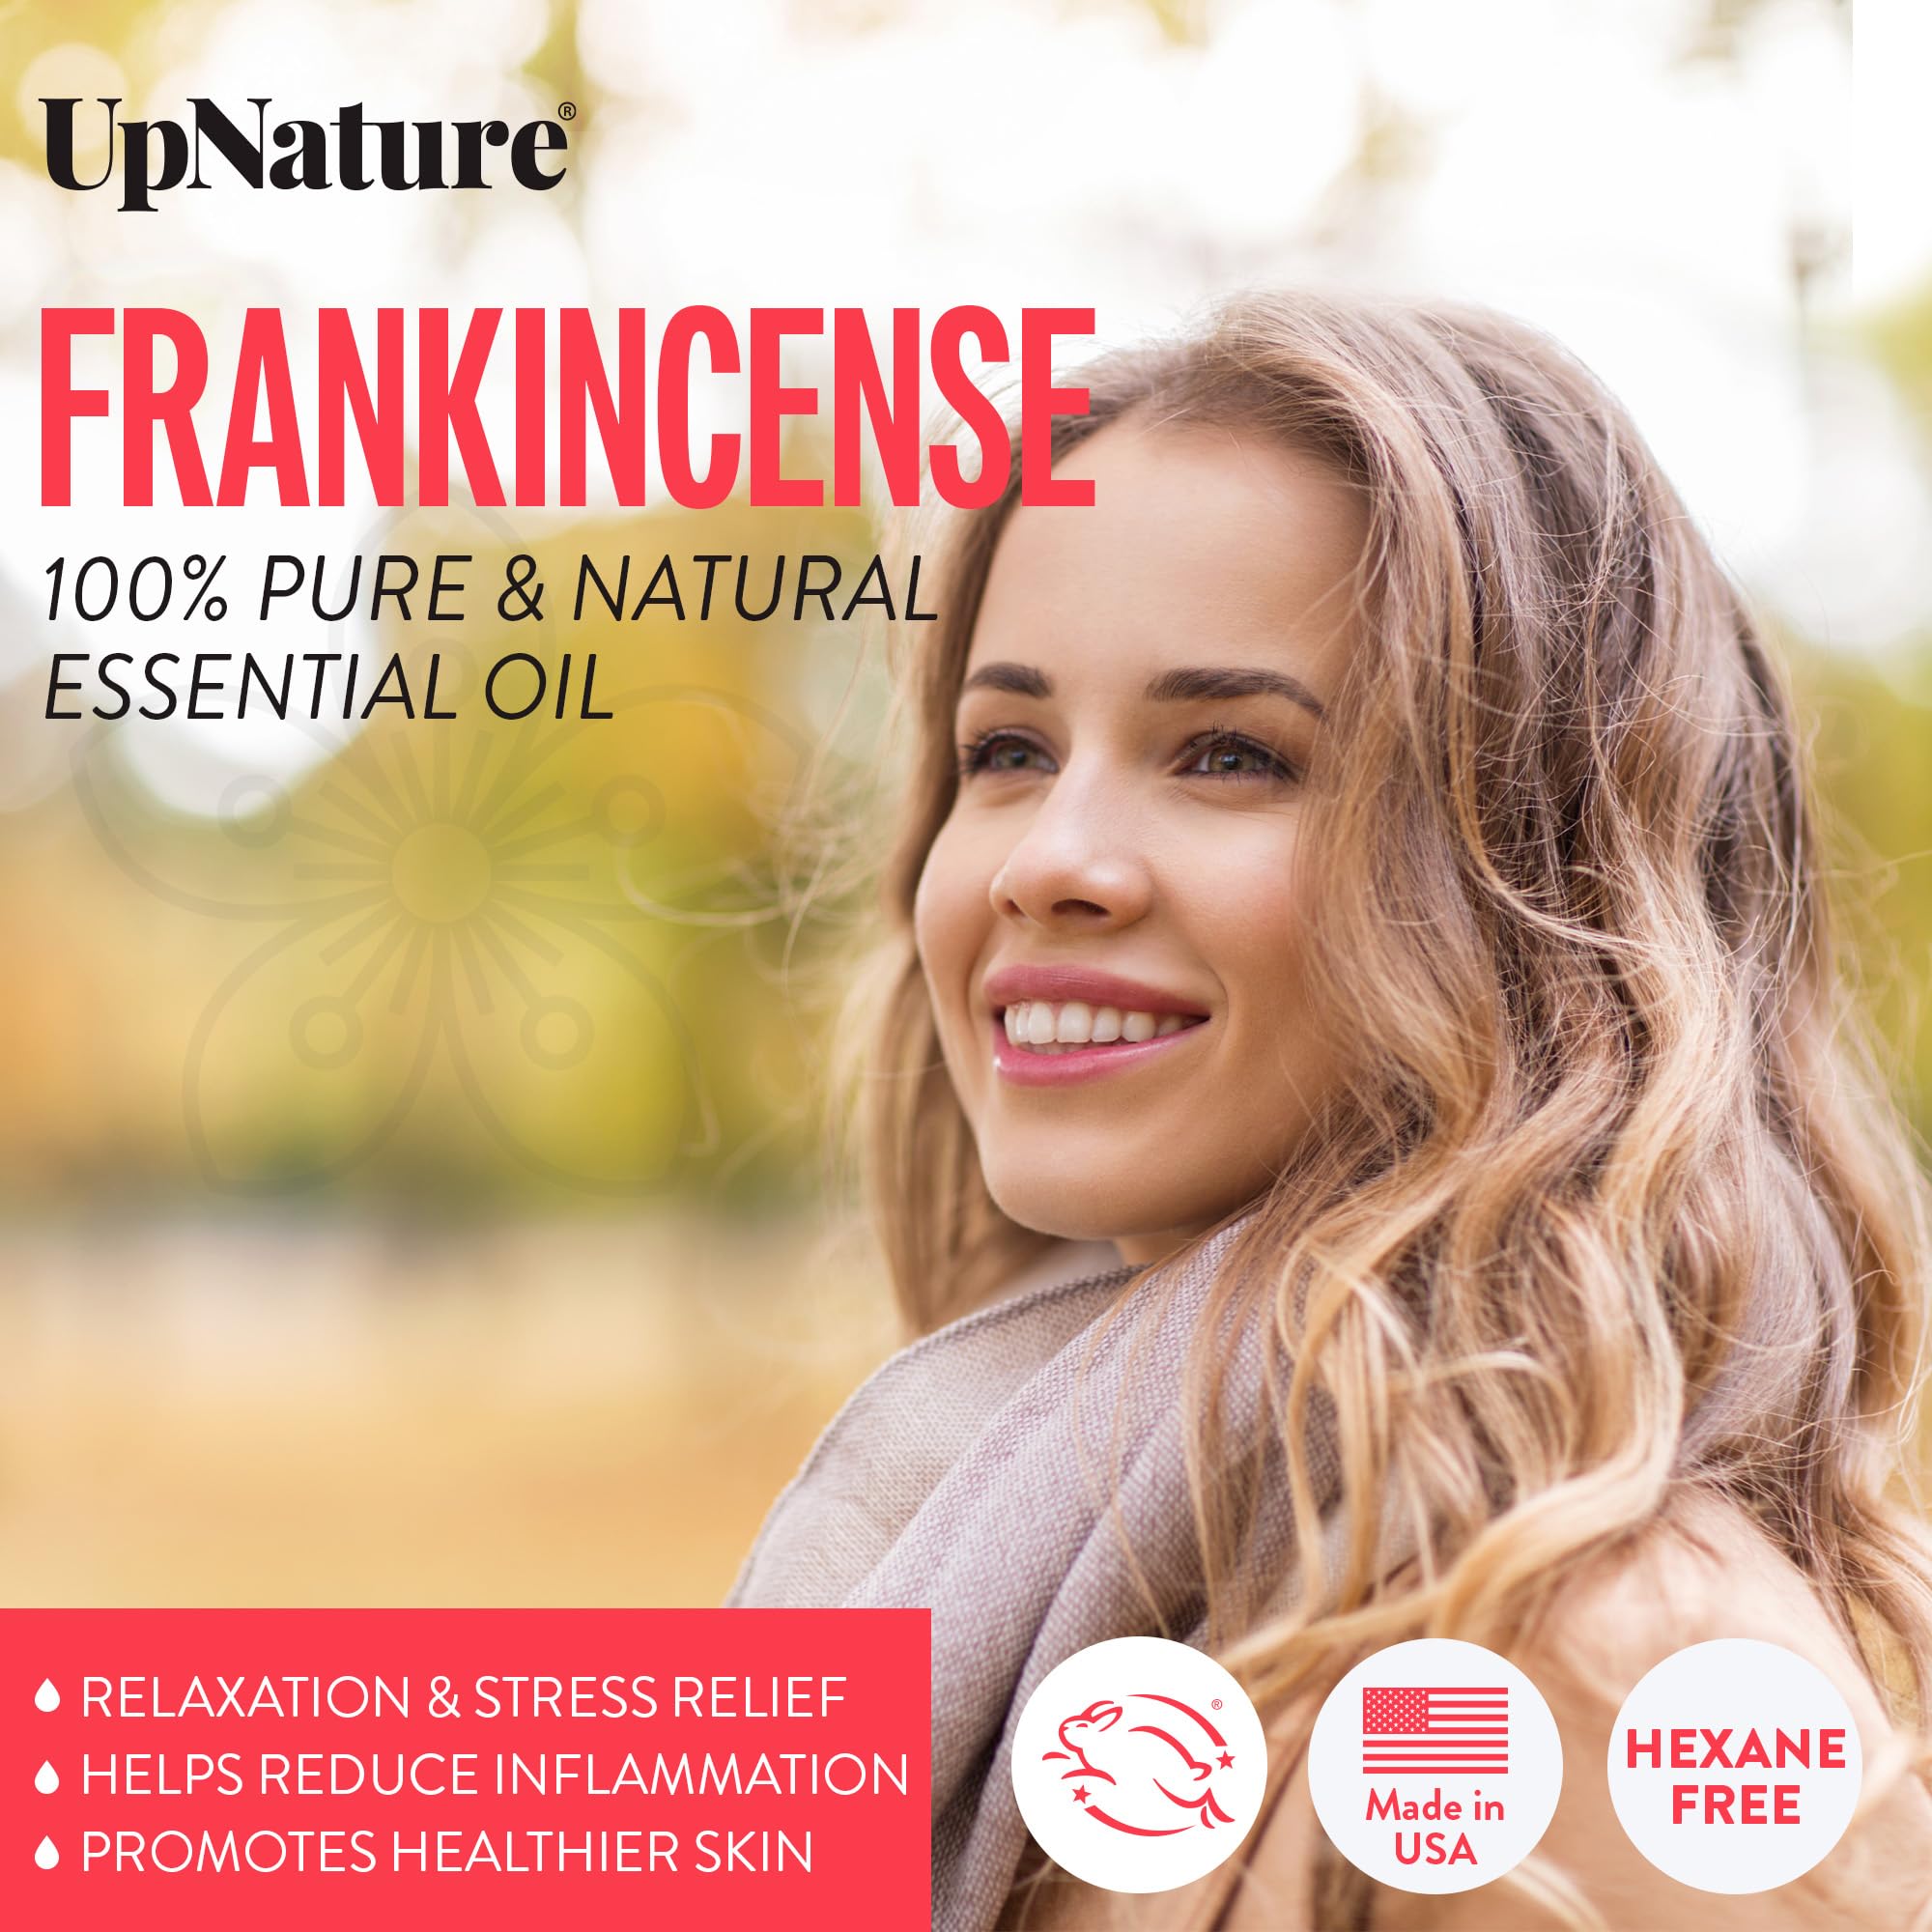 UpNature Frankincense Oil Roll On Frankincense Essential Oils for Skin & Nails, Tones & Evens Skin, Mood Booster -Therapeutic Grade Aromatherapy Oil